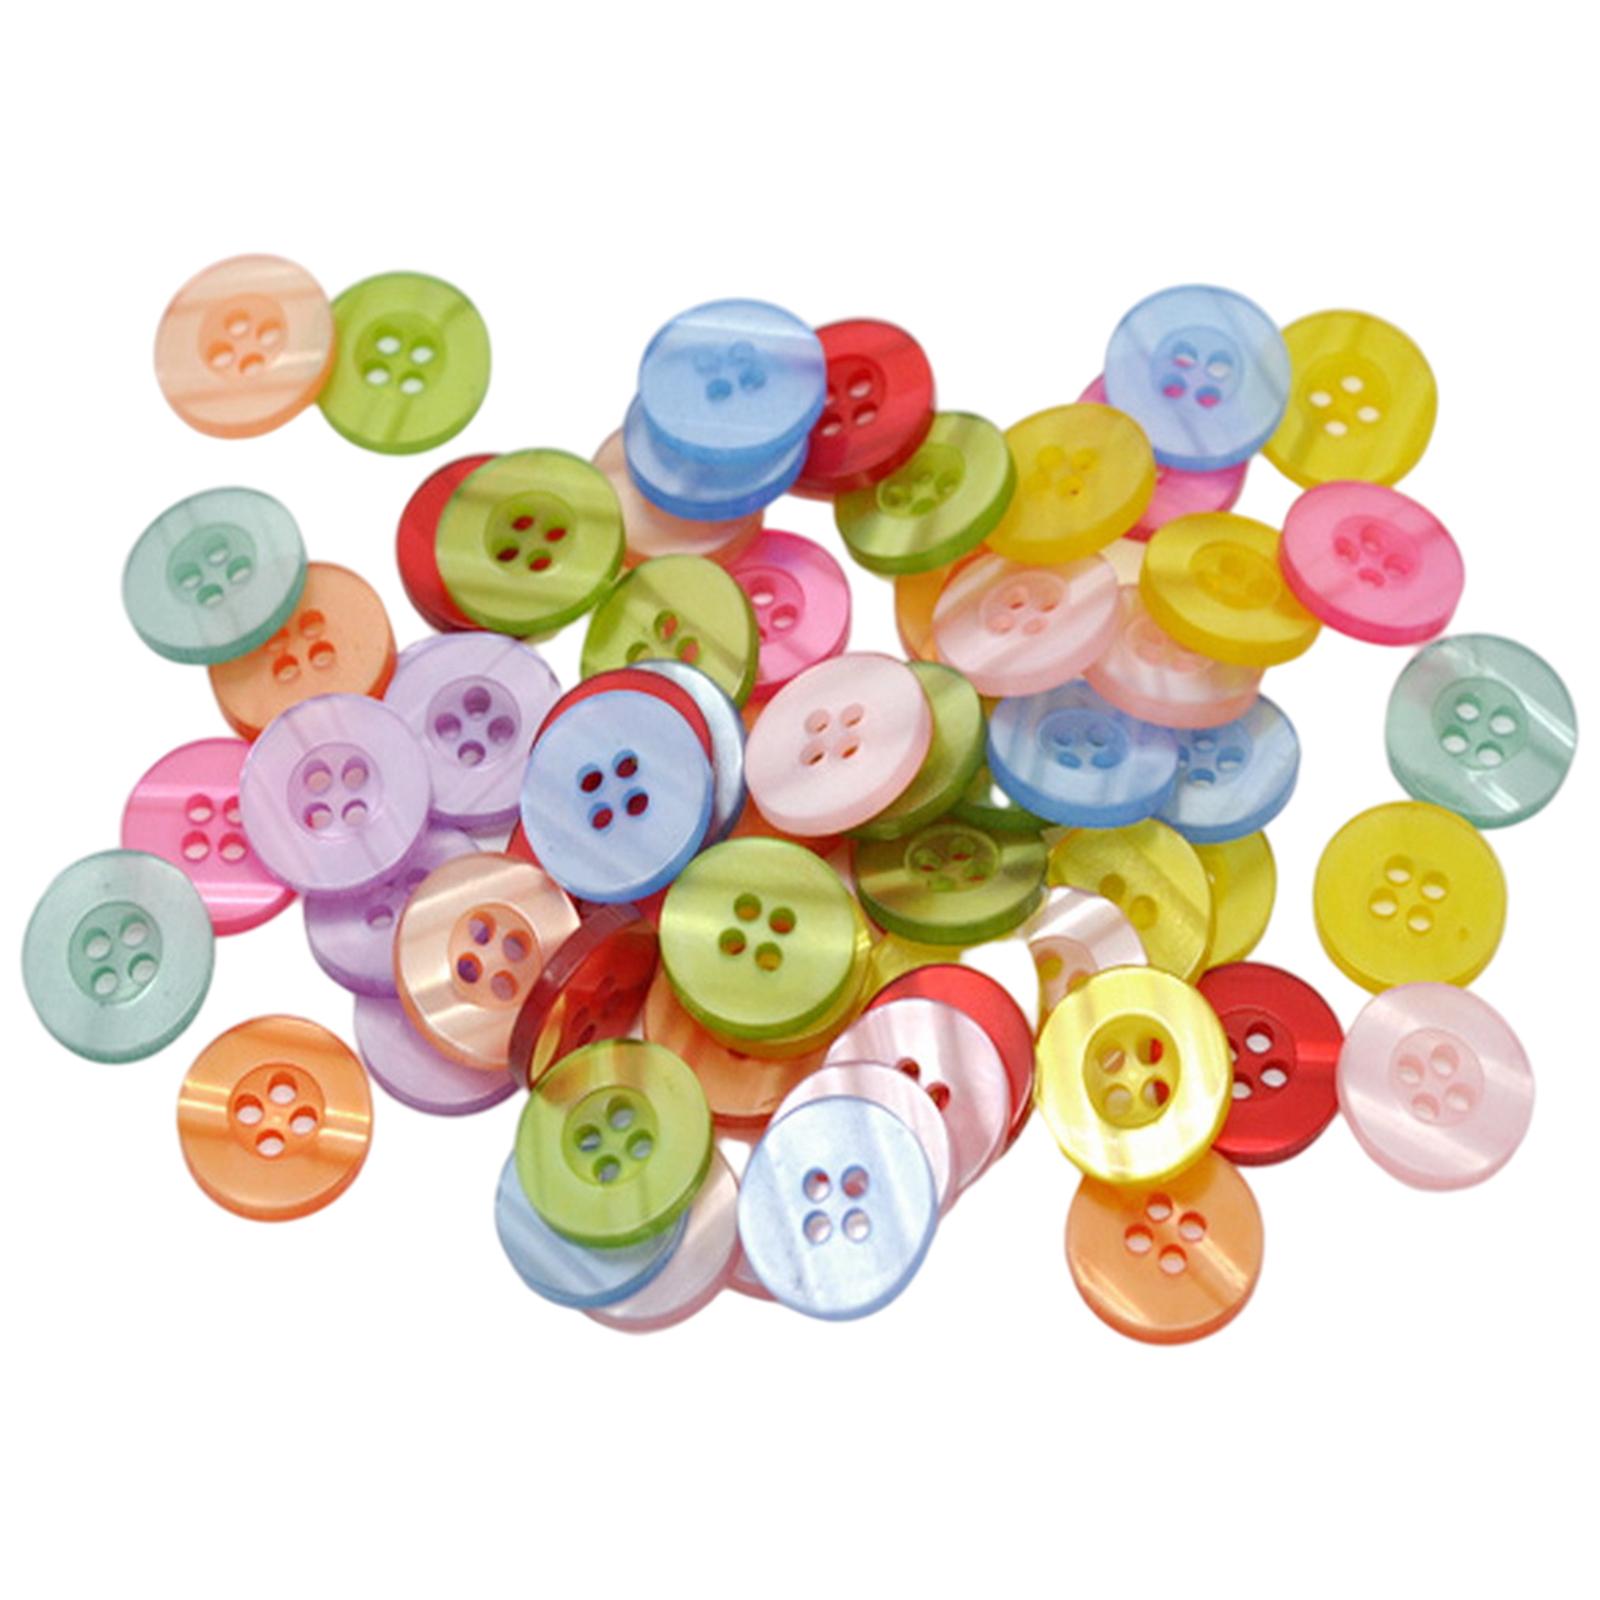 100 Pieces Craft Buttons Assorted Colors 4 Holes Round Shape 15mm